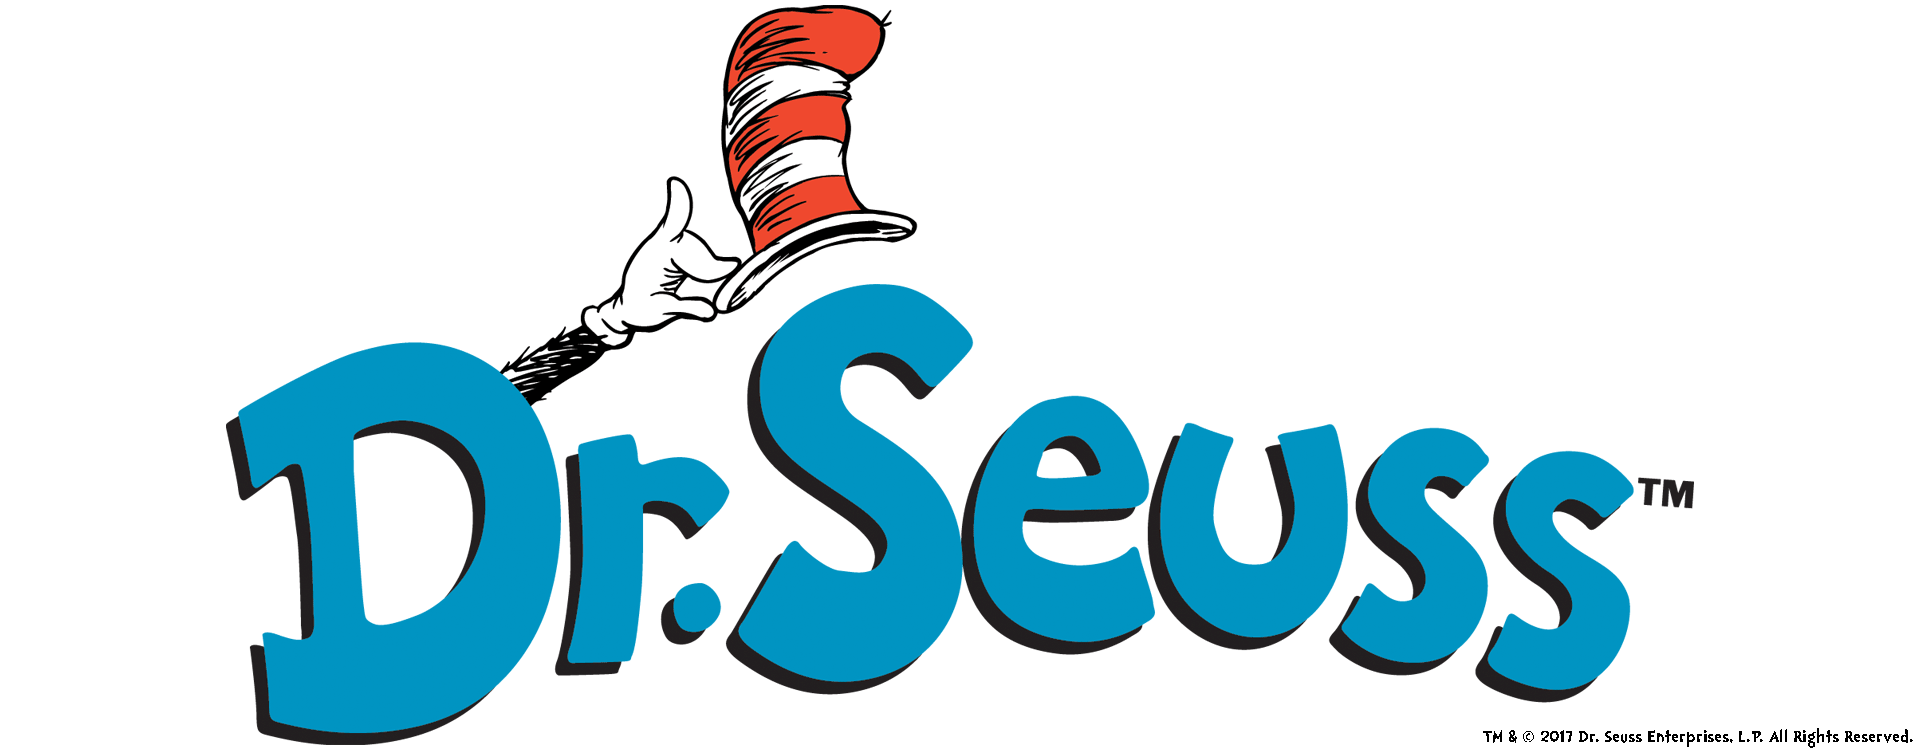 Dr. Seuss's Characters with Blue Hair - wide 2